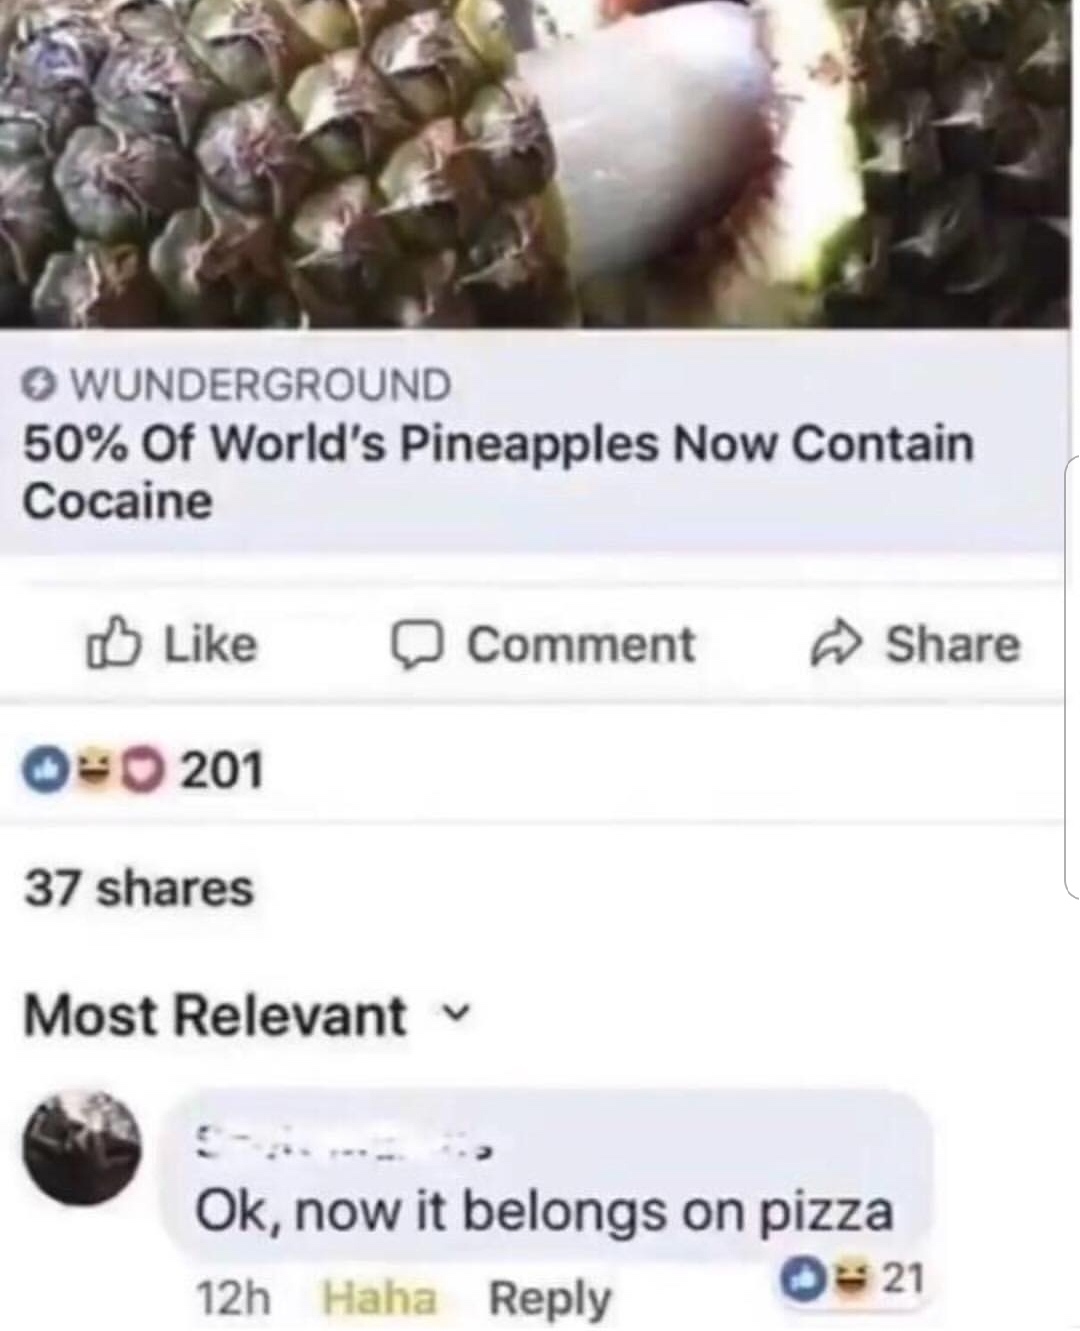 pineapple cocaine pizza meme - Wunderground 50% Of World's Pineapples Now Contain Cocaine Comment 0 201 37 Most Relevant Ok, now it belongs on pizza 21 12h Haha